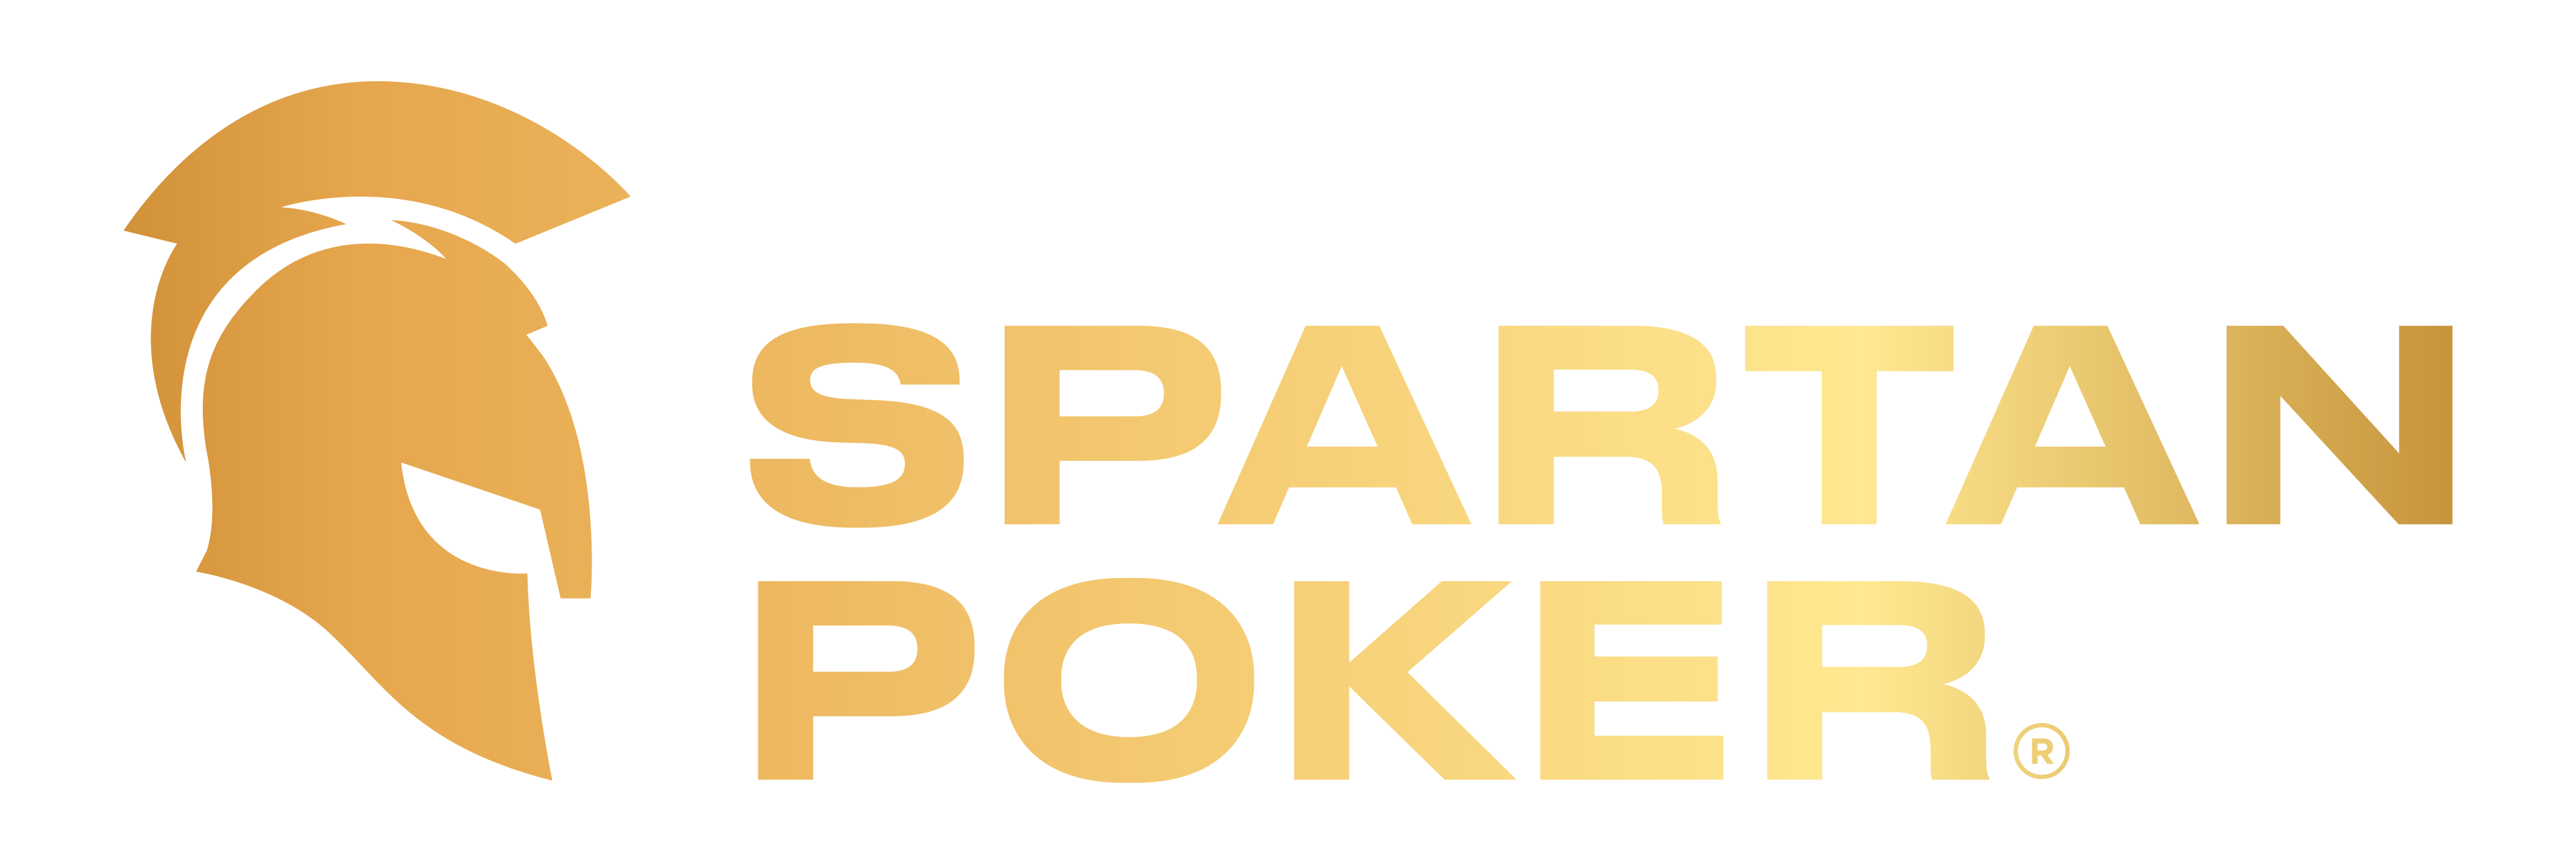 Spartan Poker and Moneycontrol announce season 2 of the popular online poker tournament “Poker for People” with 1 Cr Guaranteed!